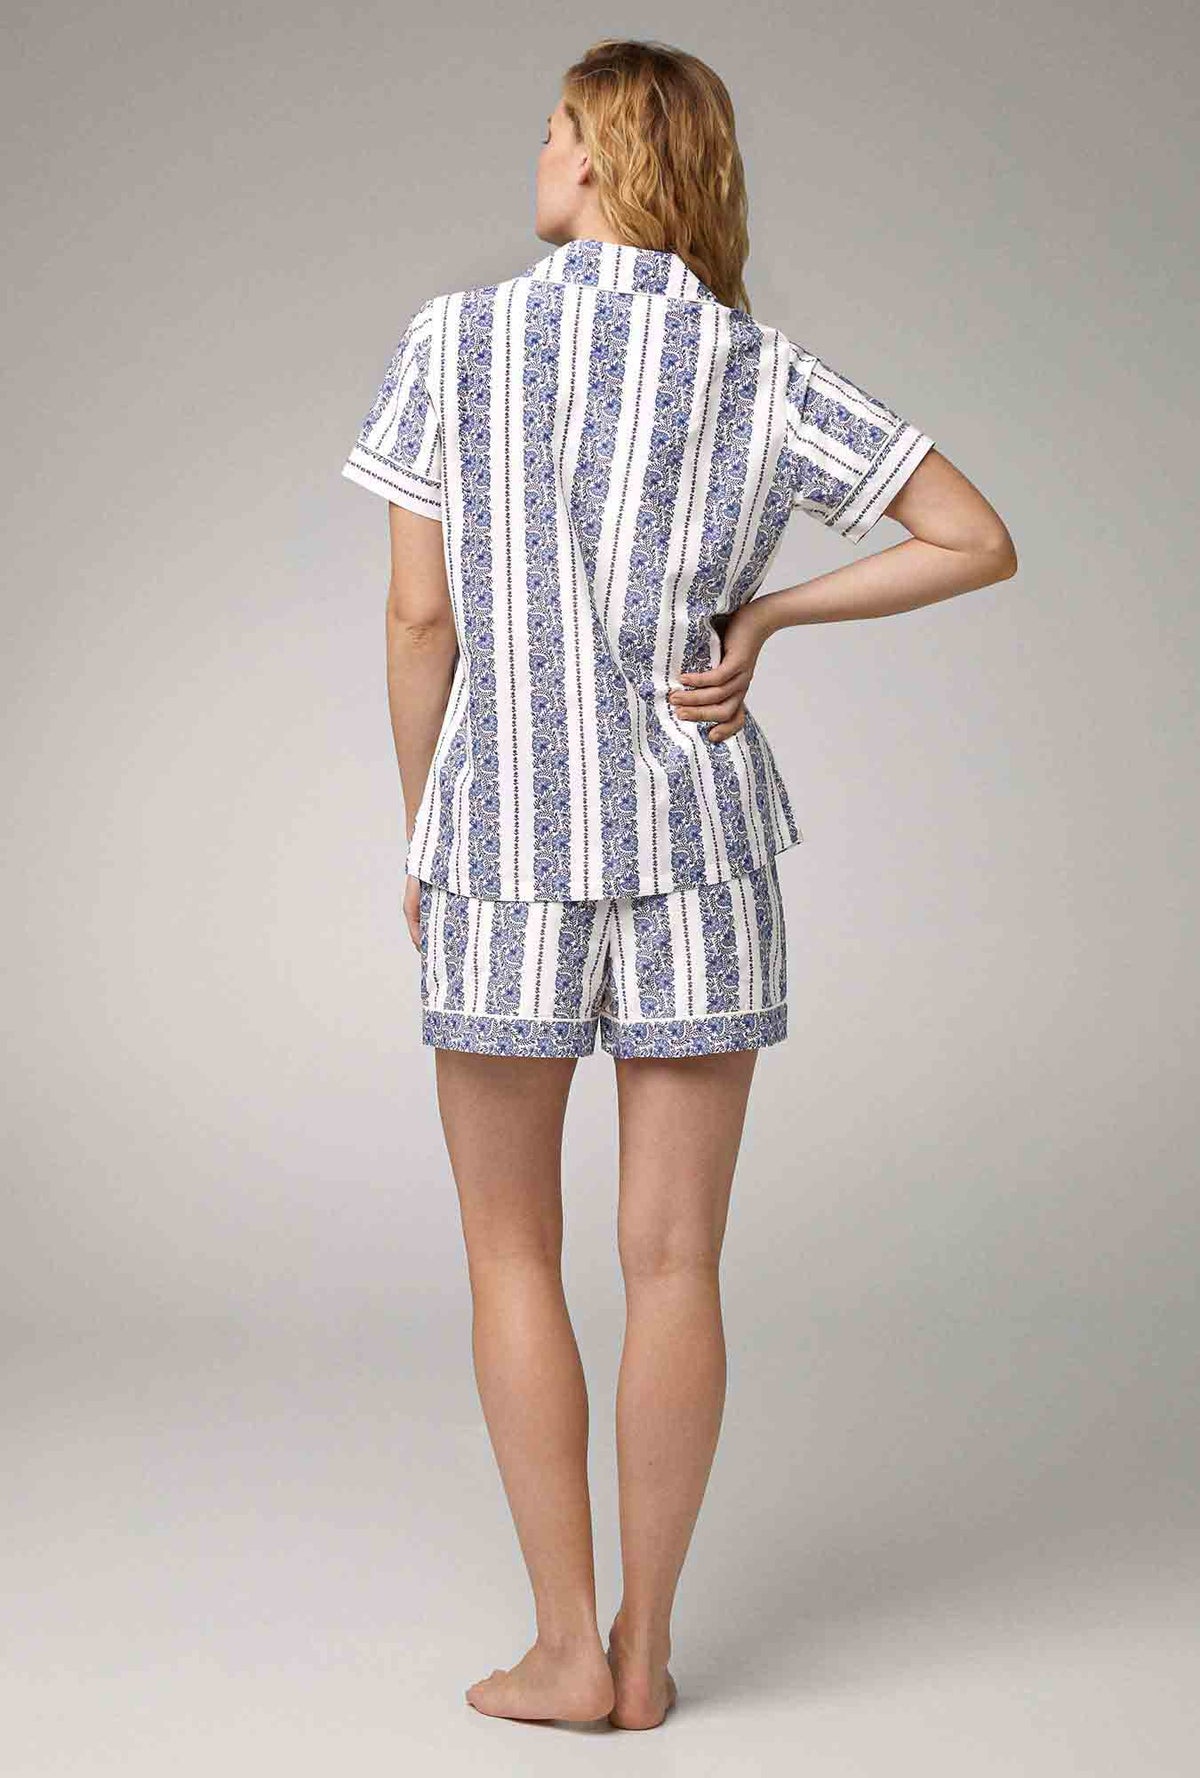 A lady wearing Short Sleeve Classic Woven Cotton Silk PJ Set with Provencal Stripe print